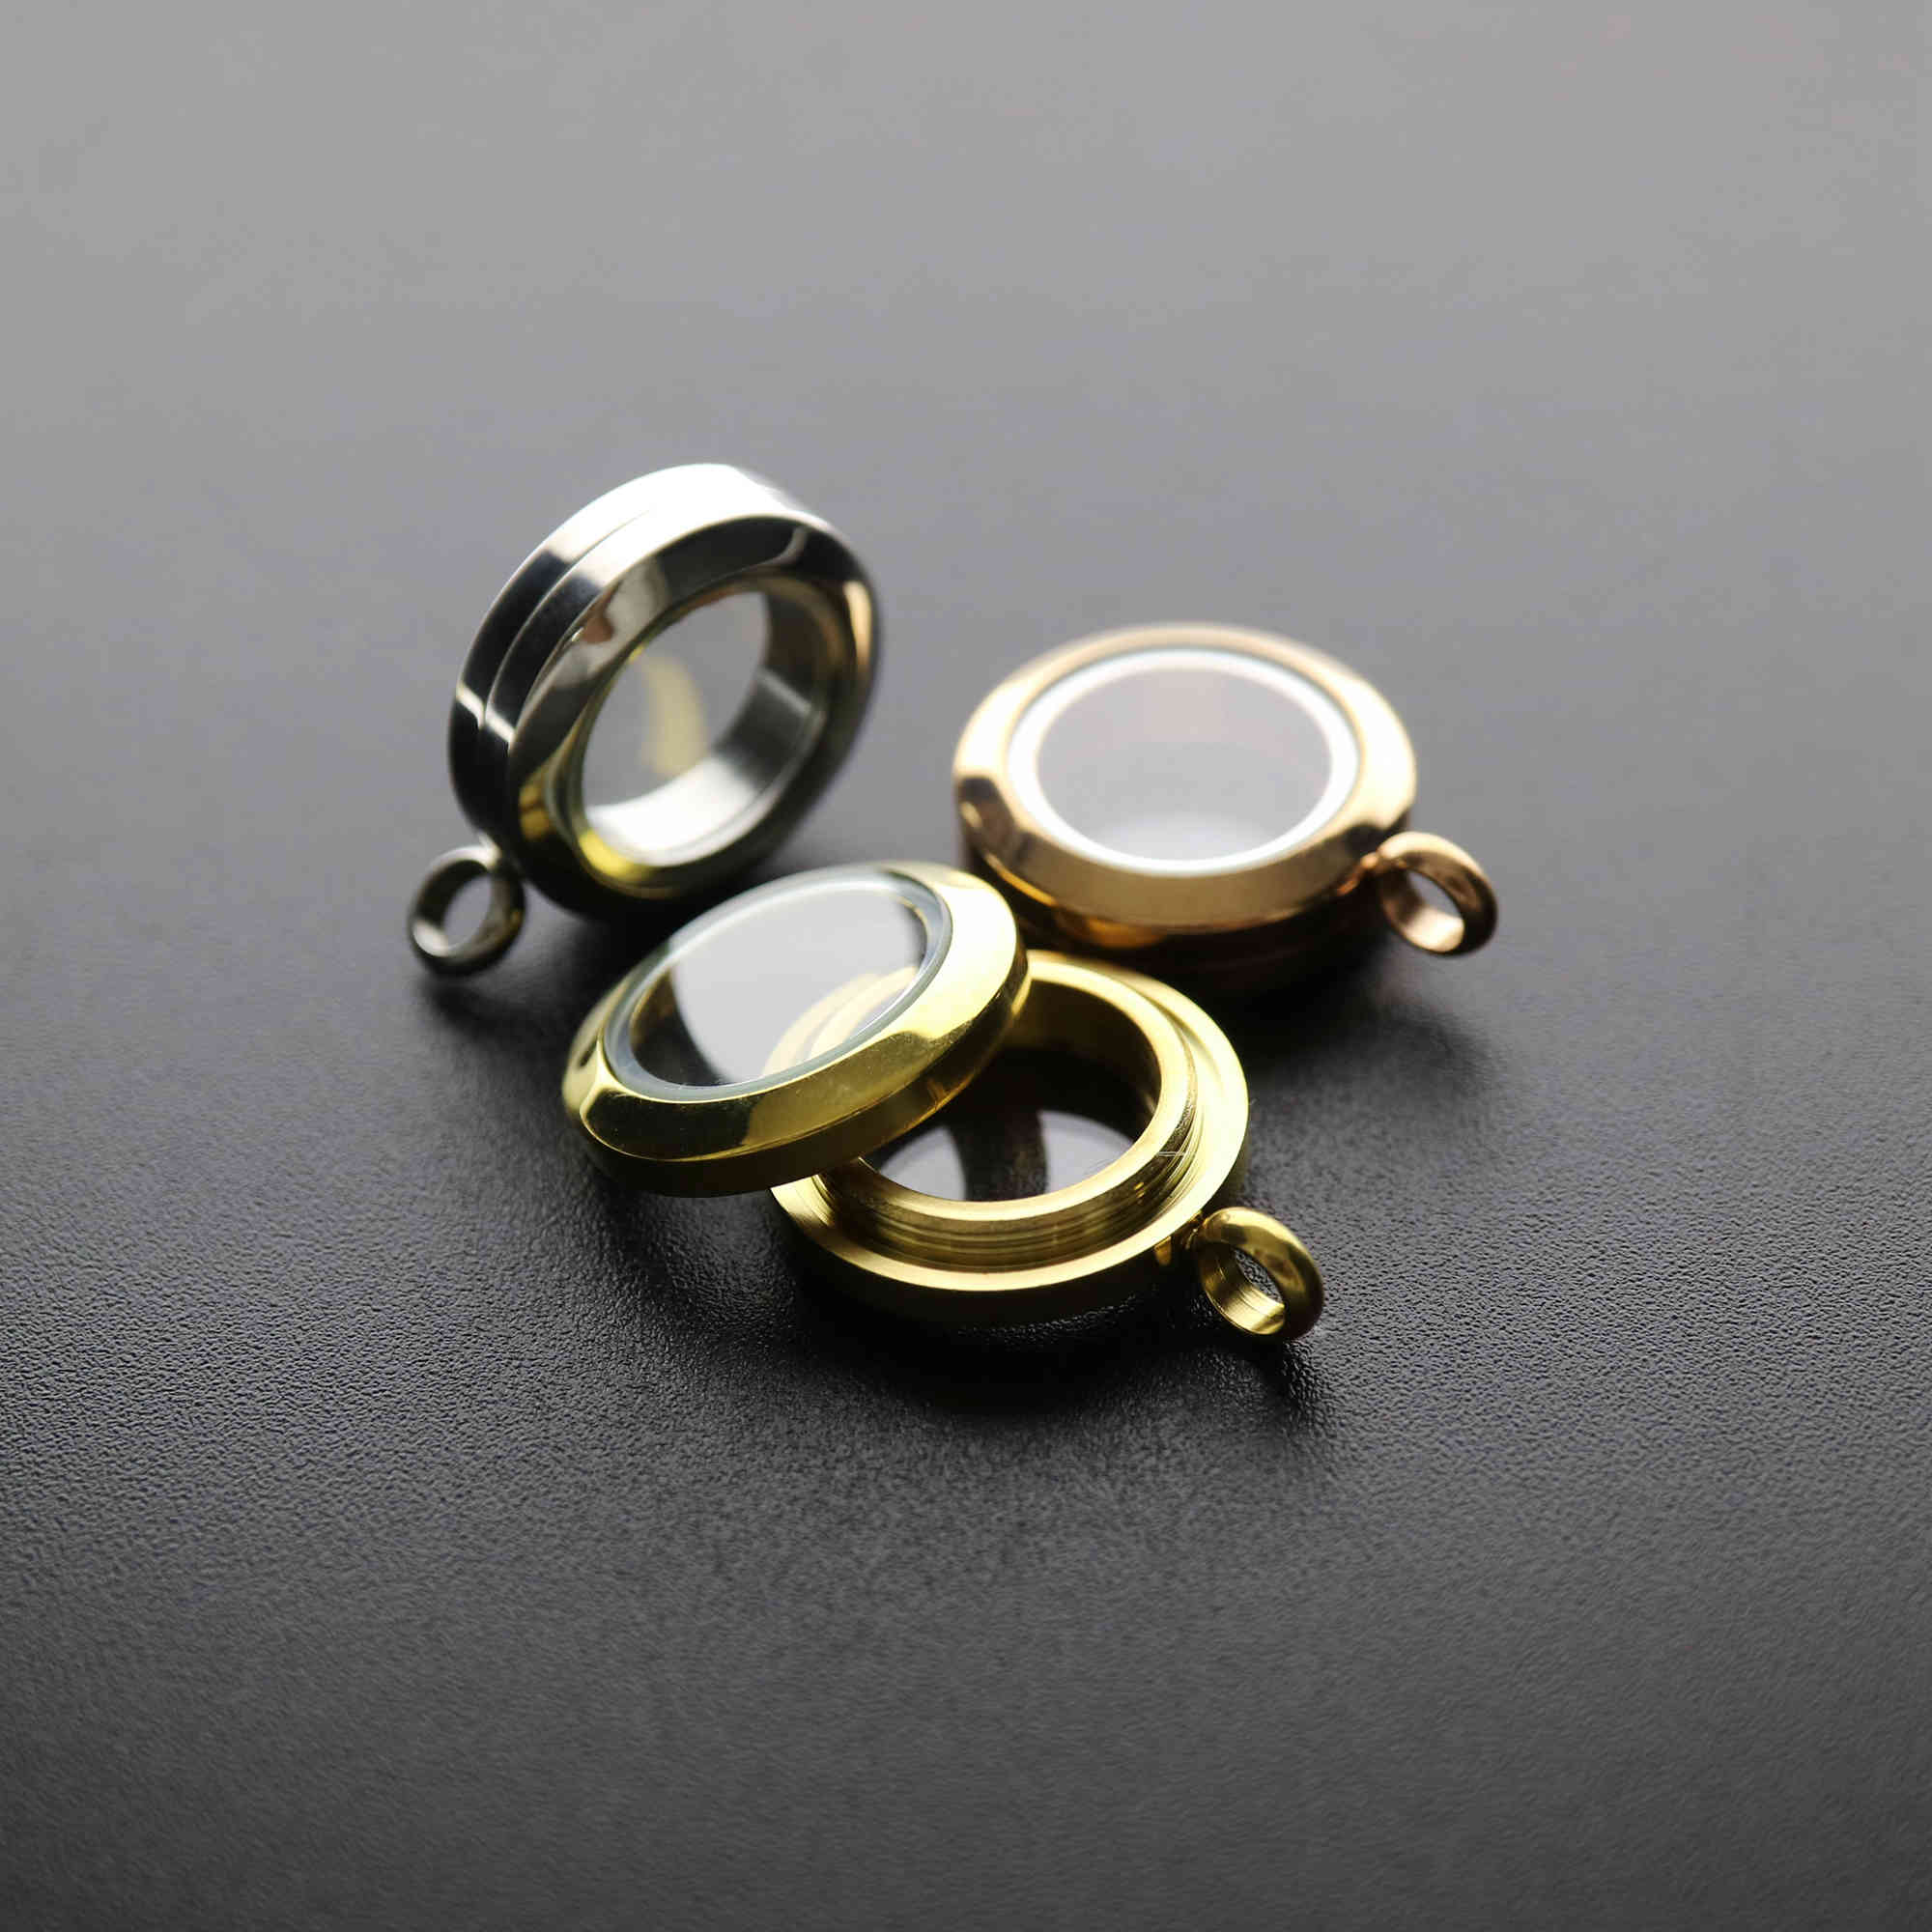 1Pcs 20MM Stainless Steel Round Glass Locket Rose Gold Plated DIY Pendant Charm Supplies 1110034 - Click Image to Close